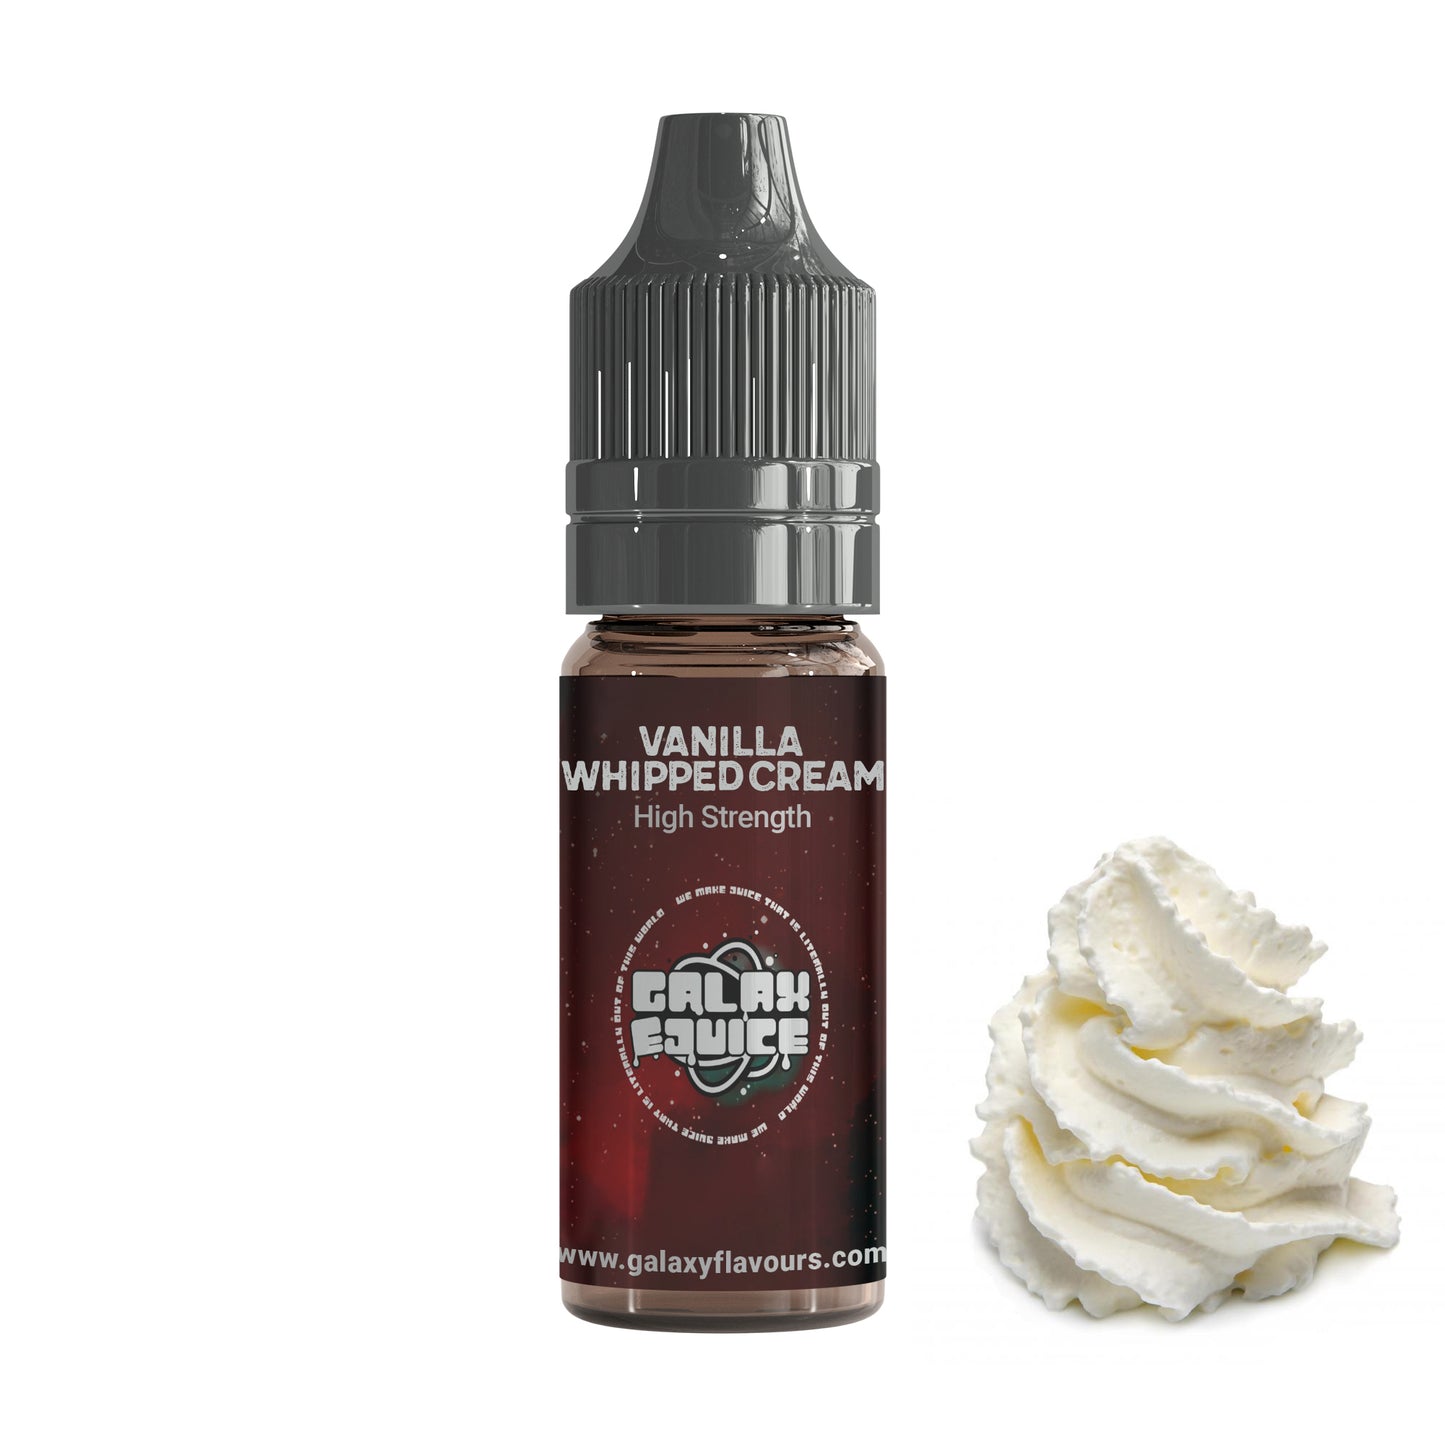 Vanilla Whipped Cream High Strength Proessional Flavouring.